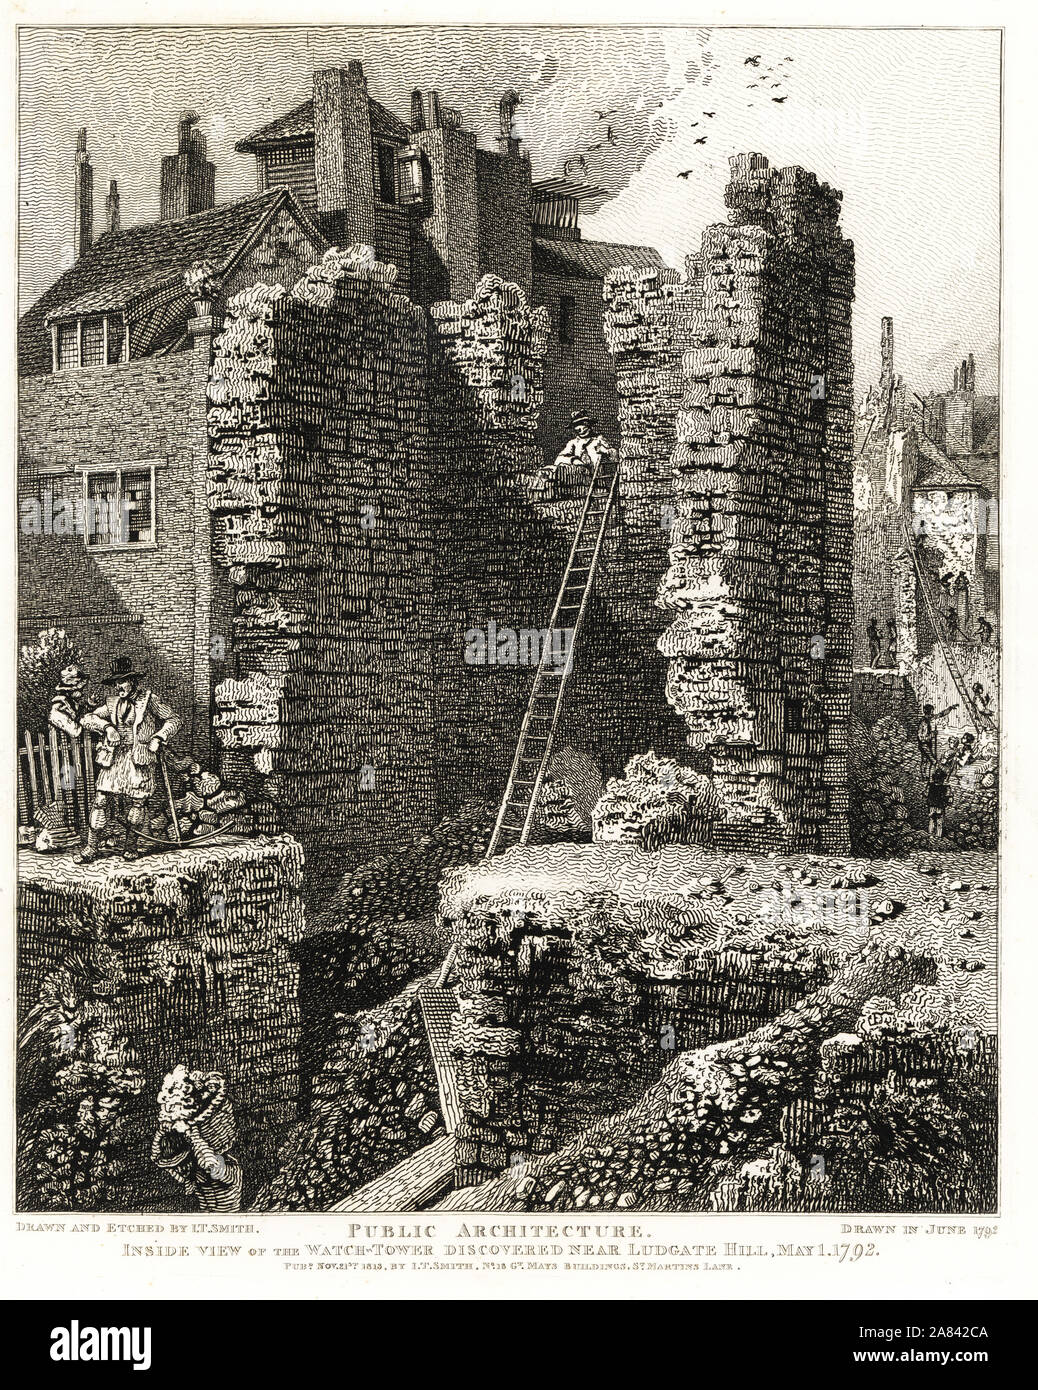 Inside view of the Watch Tower discovered near Ludgate Hill, May 1, 1792. Barbican or part of the old City wall of 1276. Copperplate engraving drawn and etched by John Thomas Smith from his Topography of London, 1813. Stock Photo